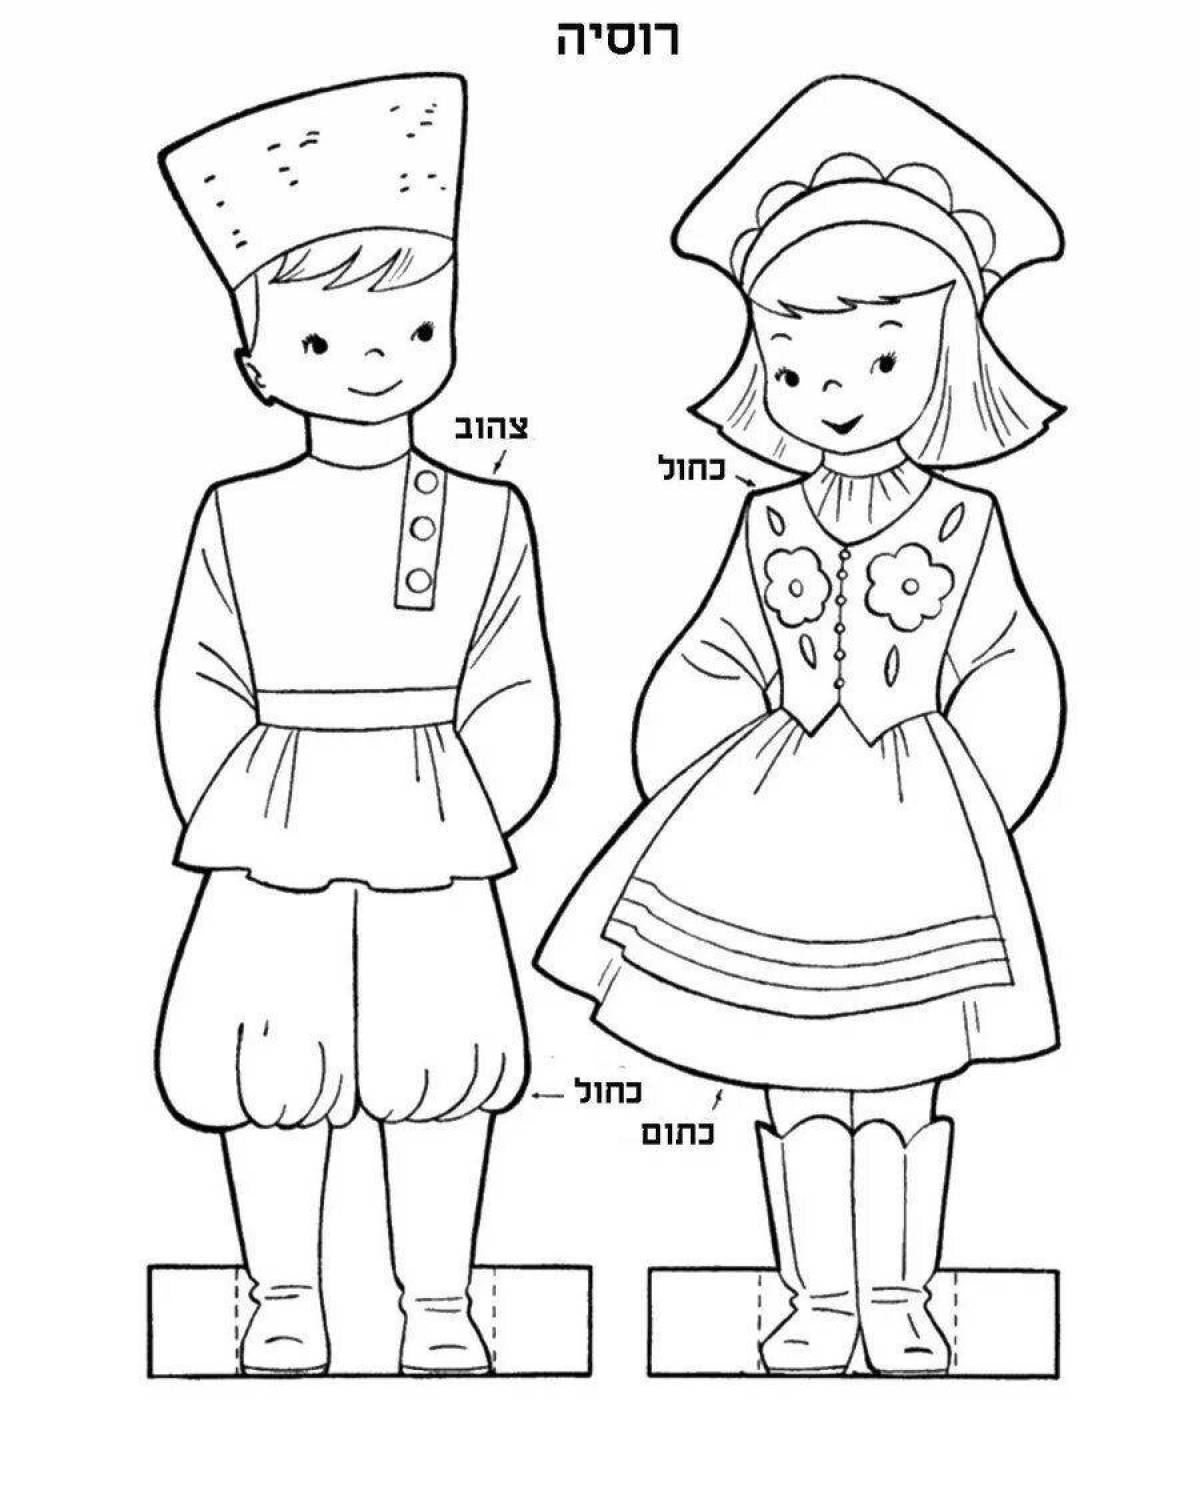 Animated Cossack coloring book